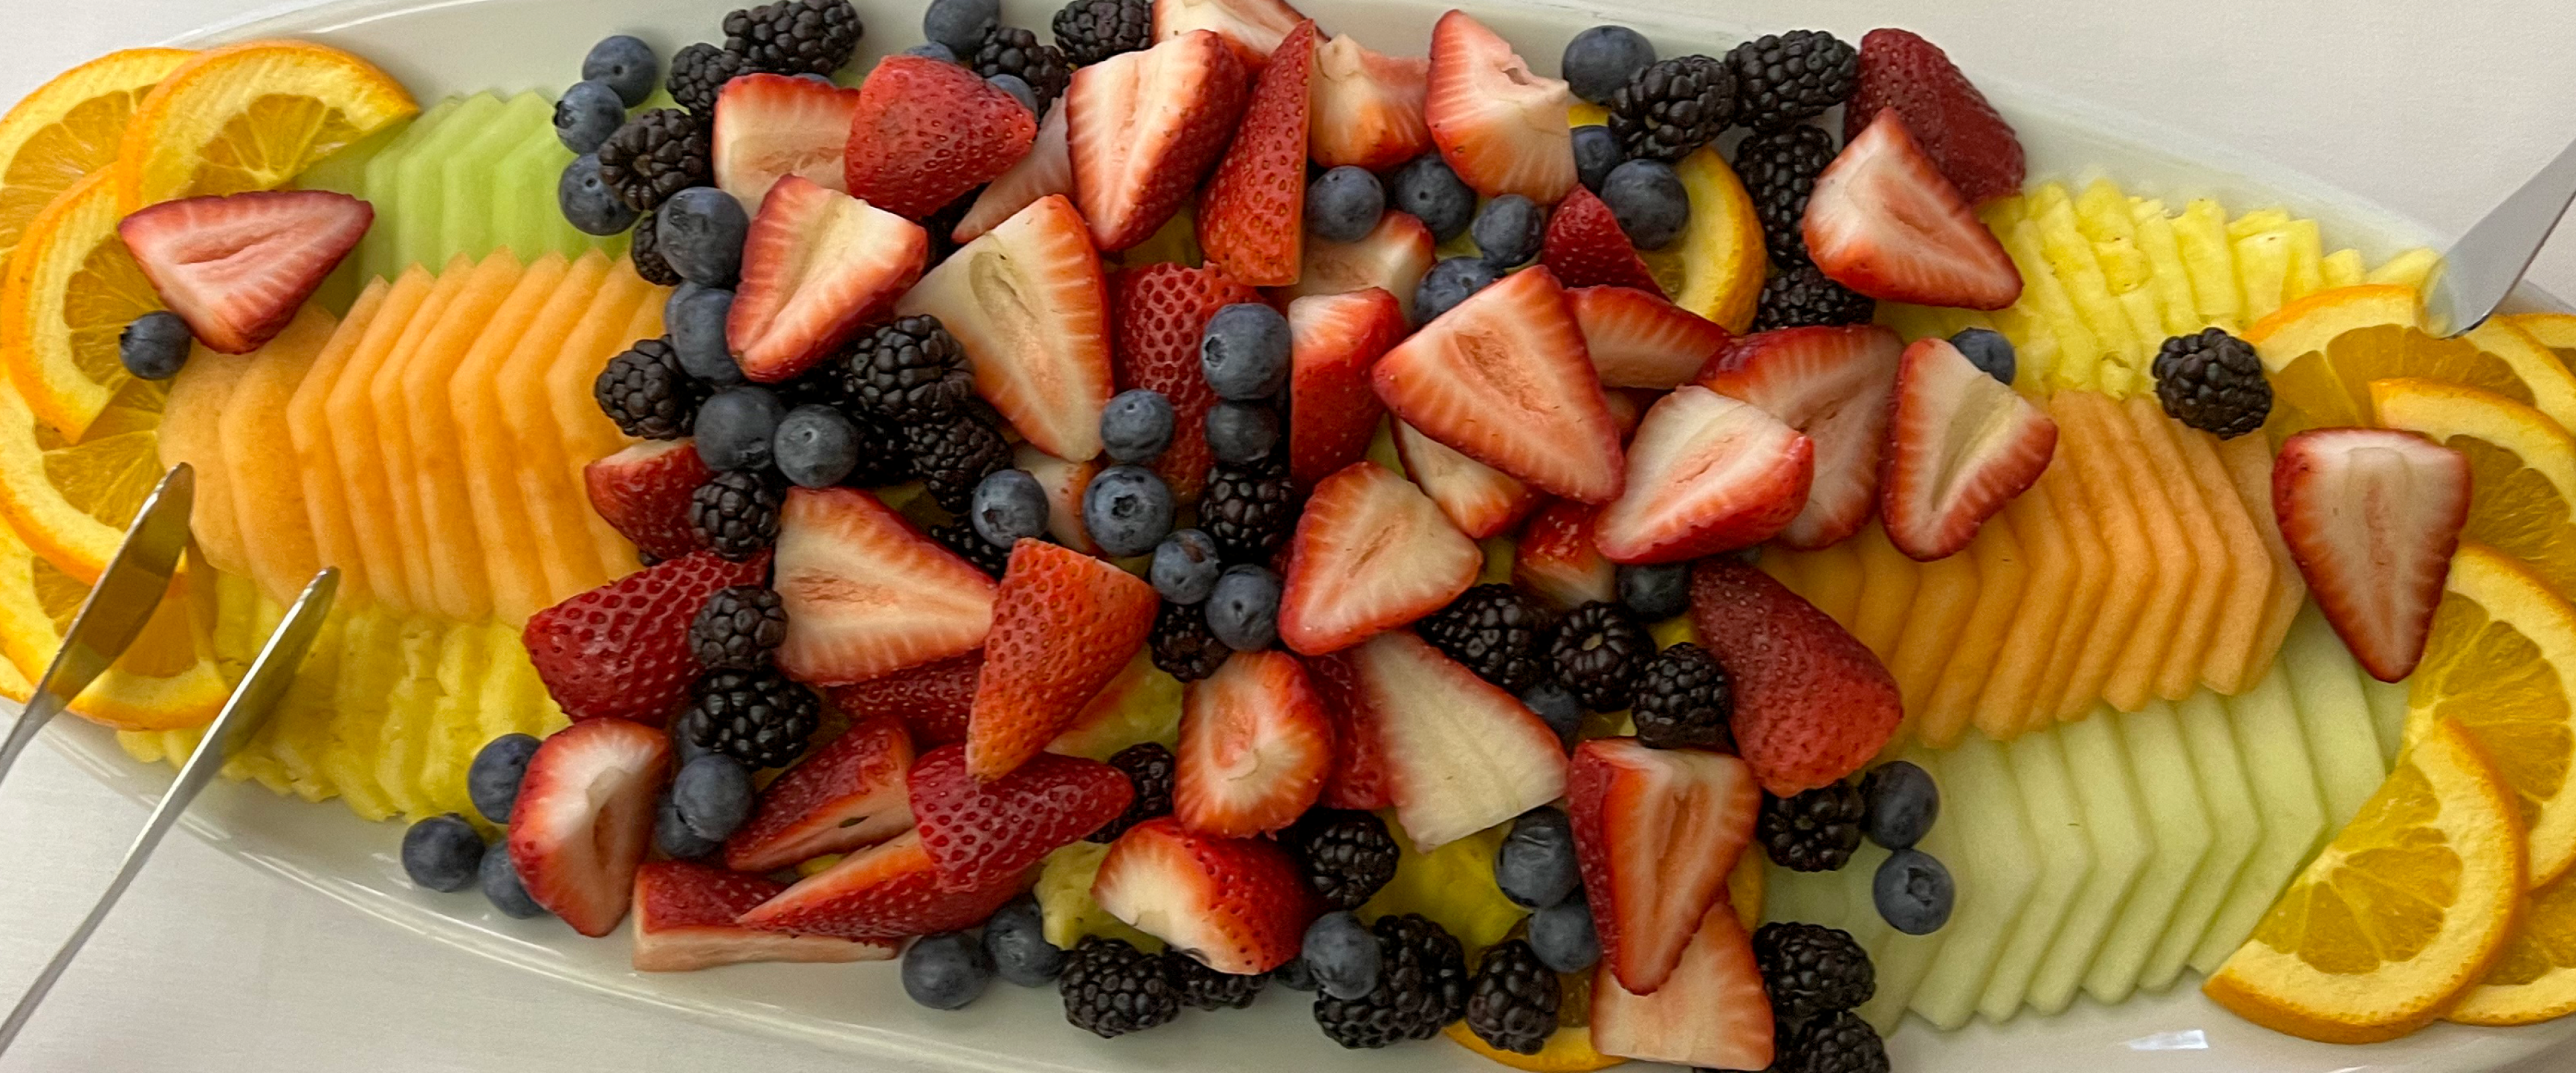 Platter of fruit; strawberries, blueberries, melons, pineapple and oranges